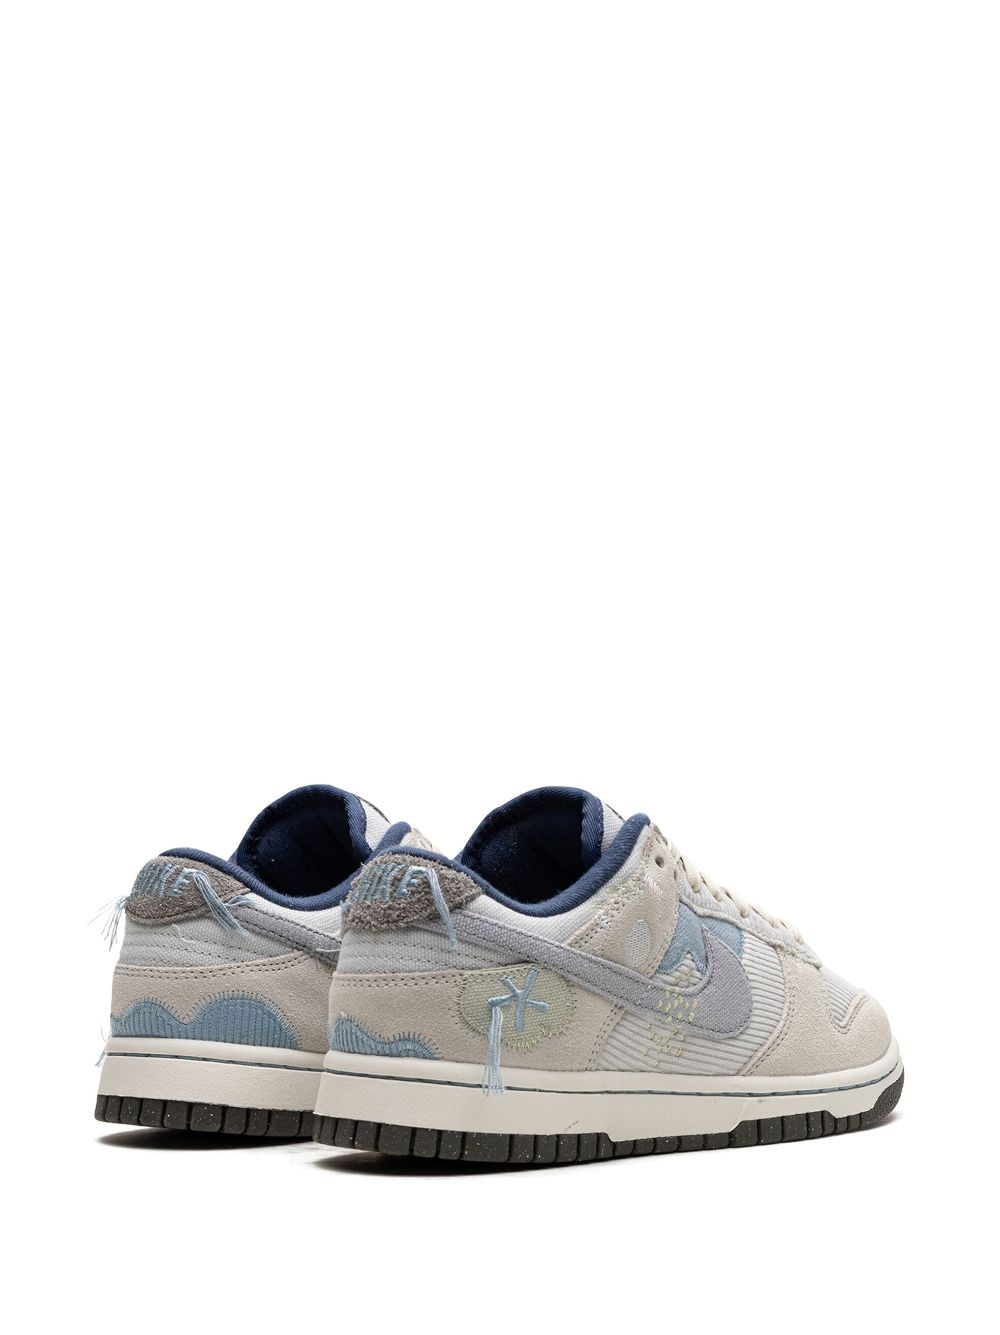 Dunk Low "Photon Dust" sneakers - 3